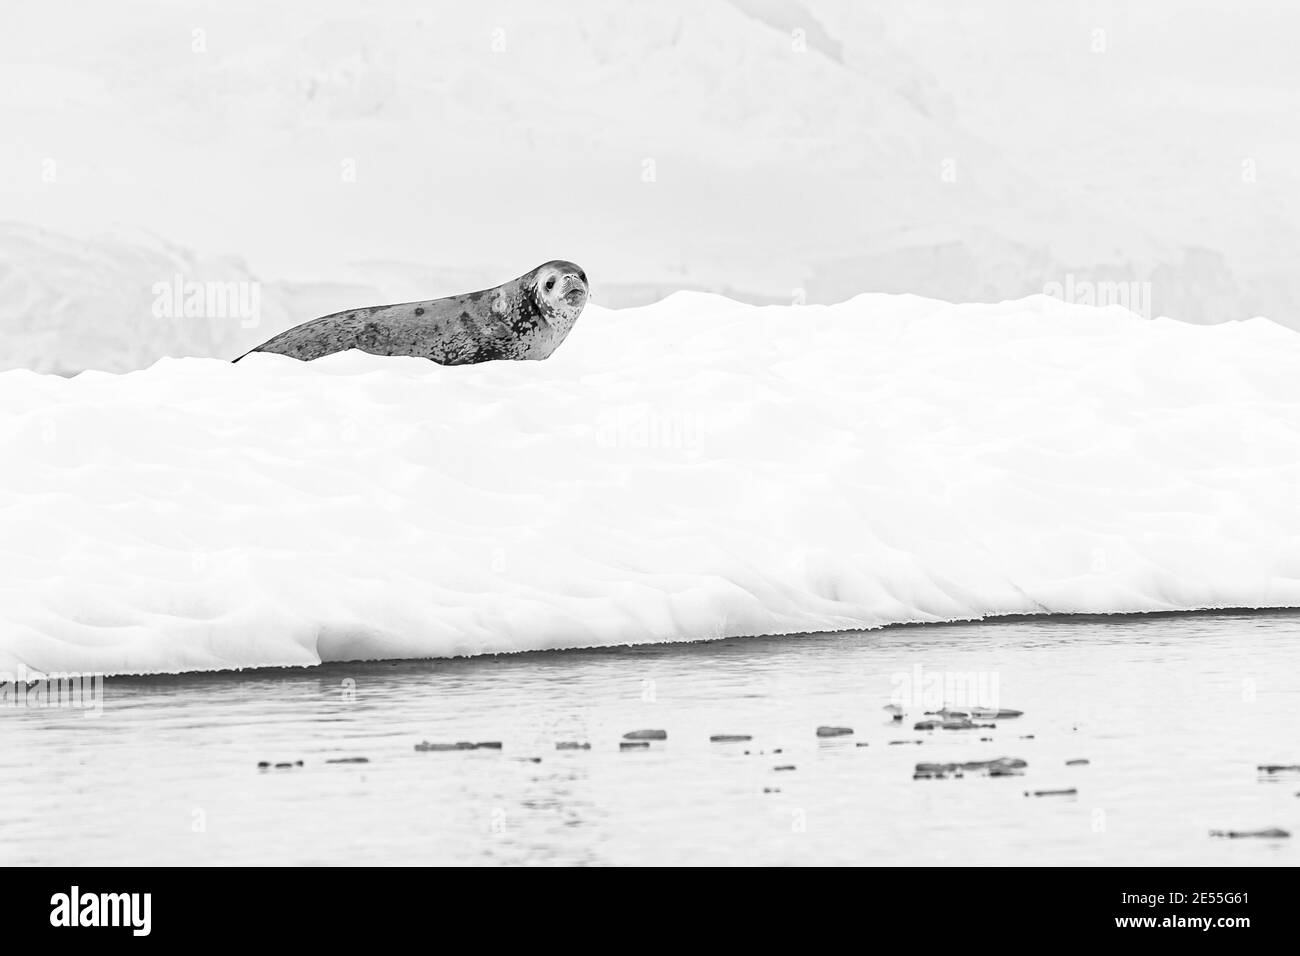 A lone crabeater seal rests on a small iceberg covered in snow.  Black and White photo. Stock Photo